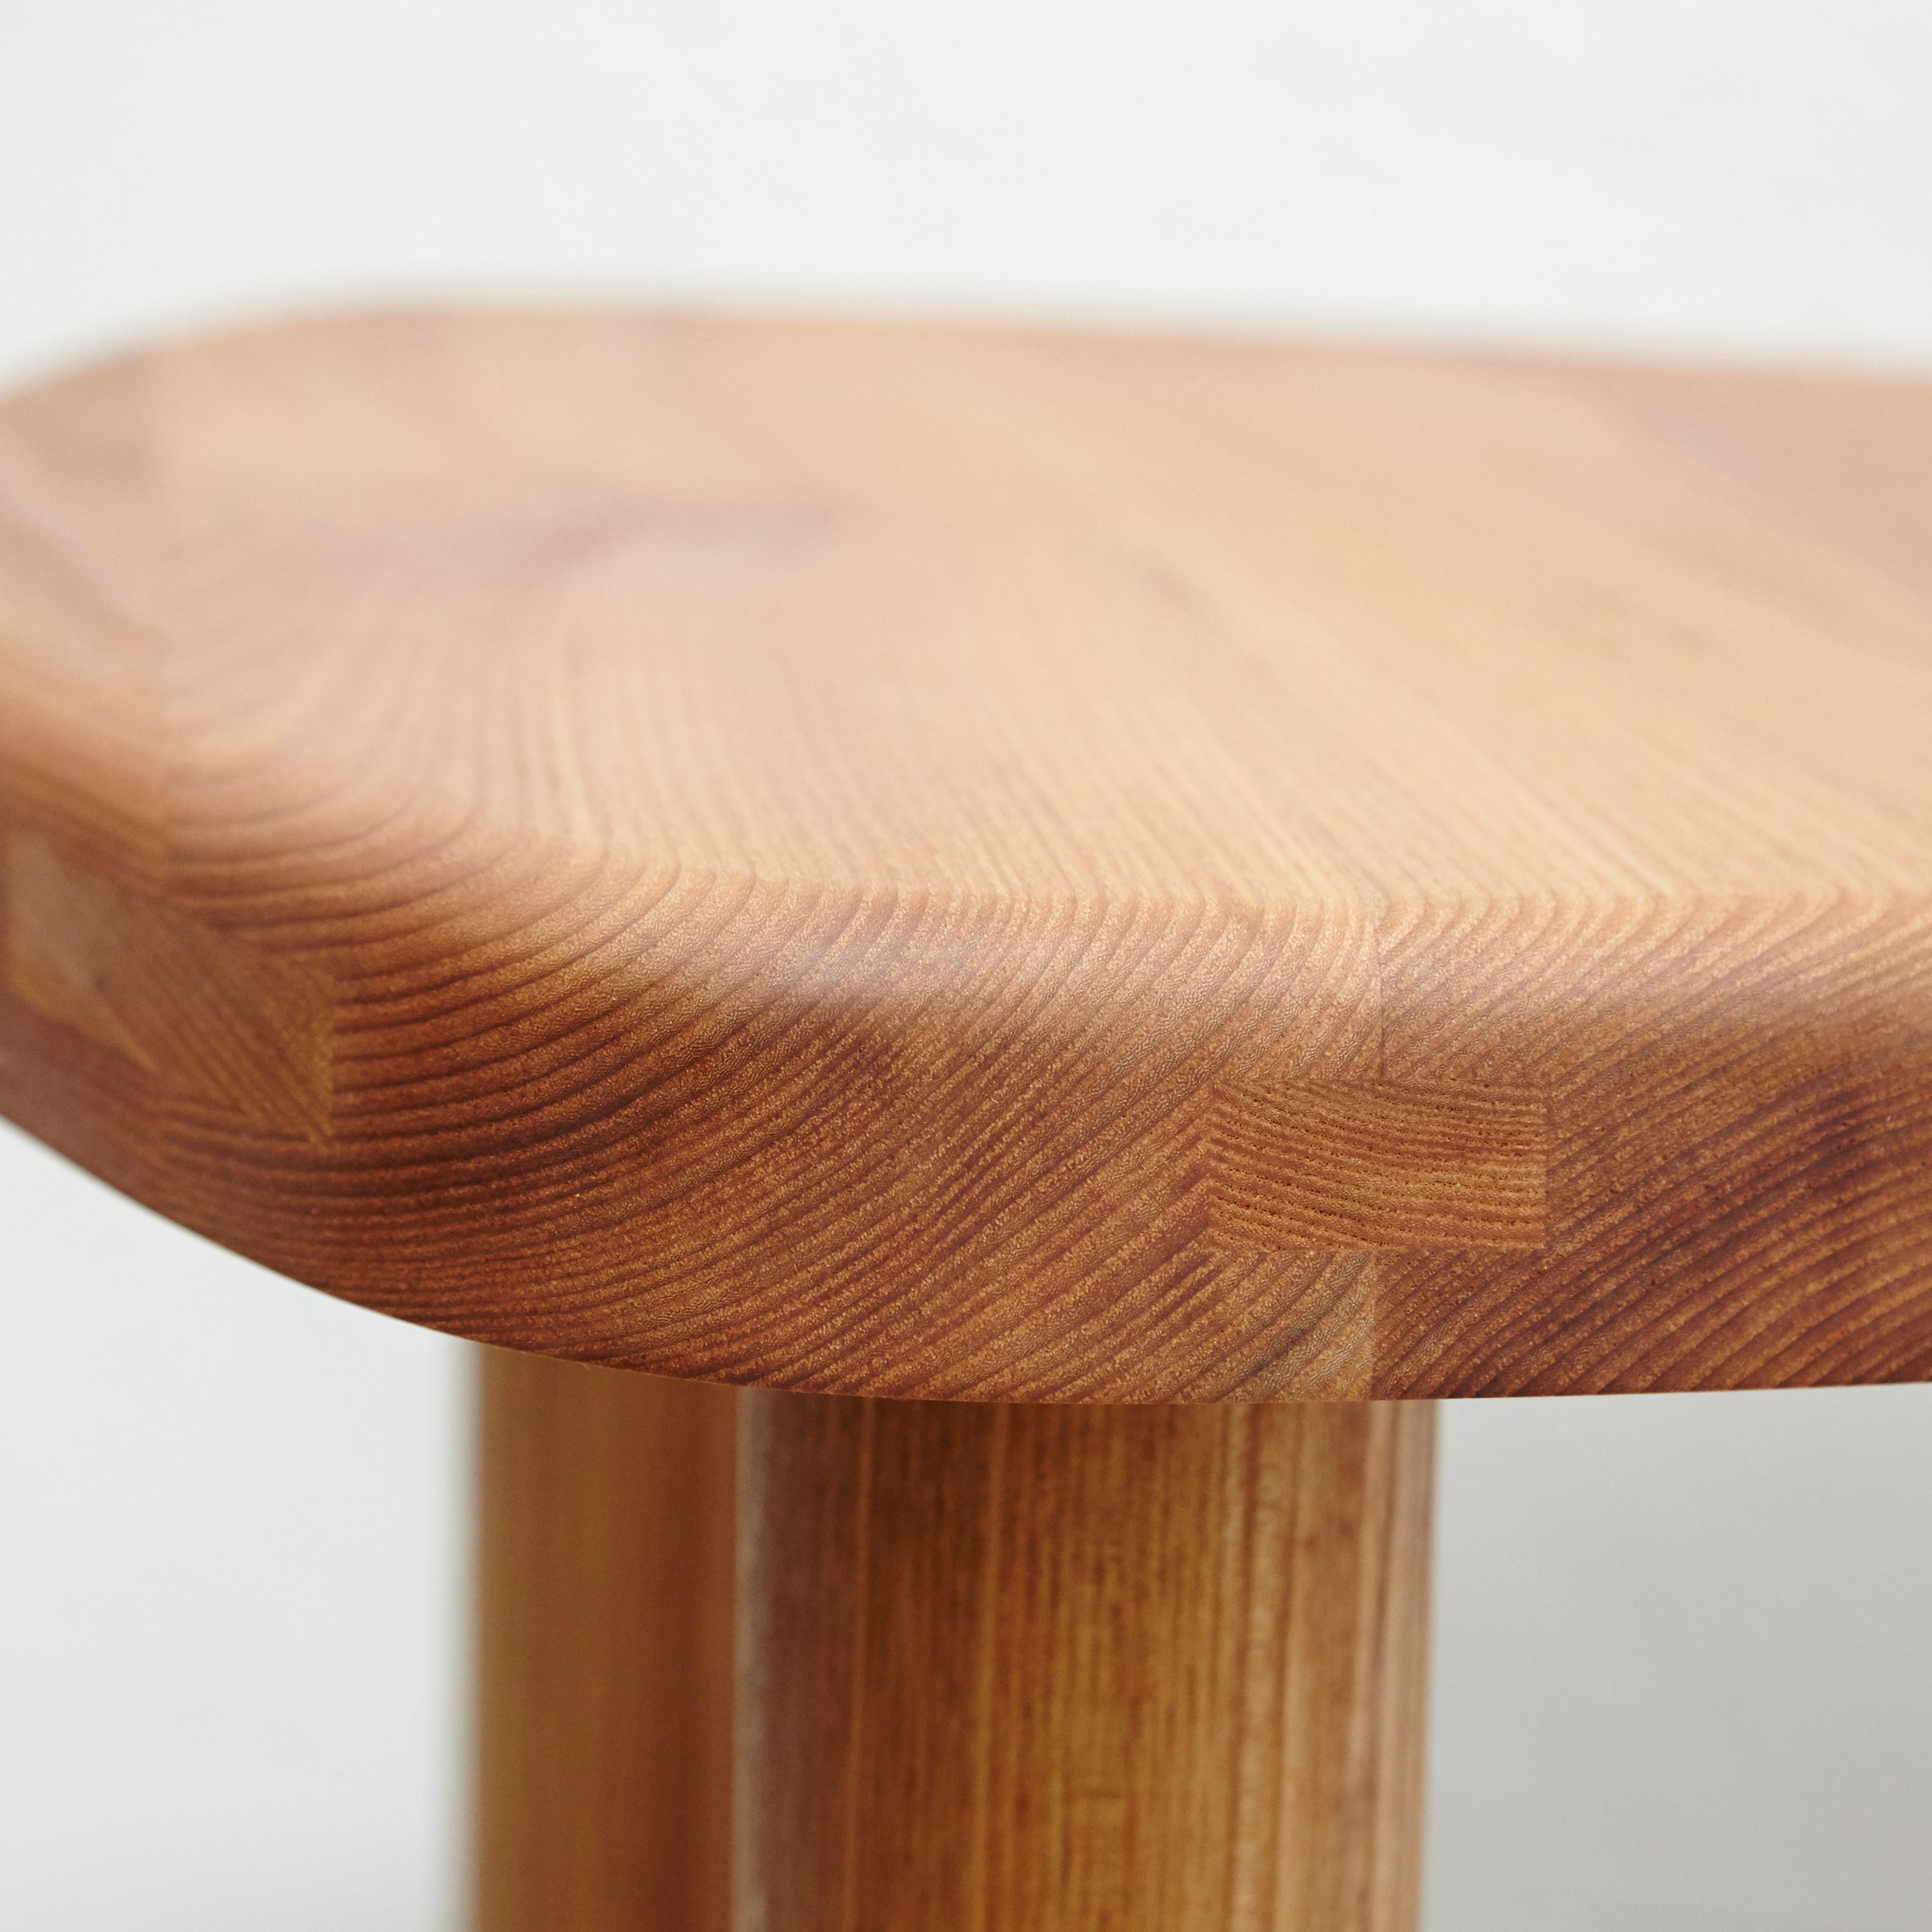 Pierre Chapo T23 Solid Elm Wood Formalist Side Table In Good Condition In Barcelona, Barcelona